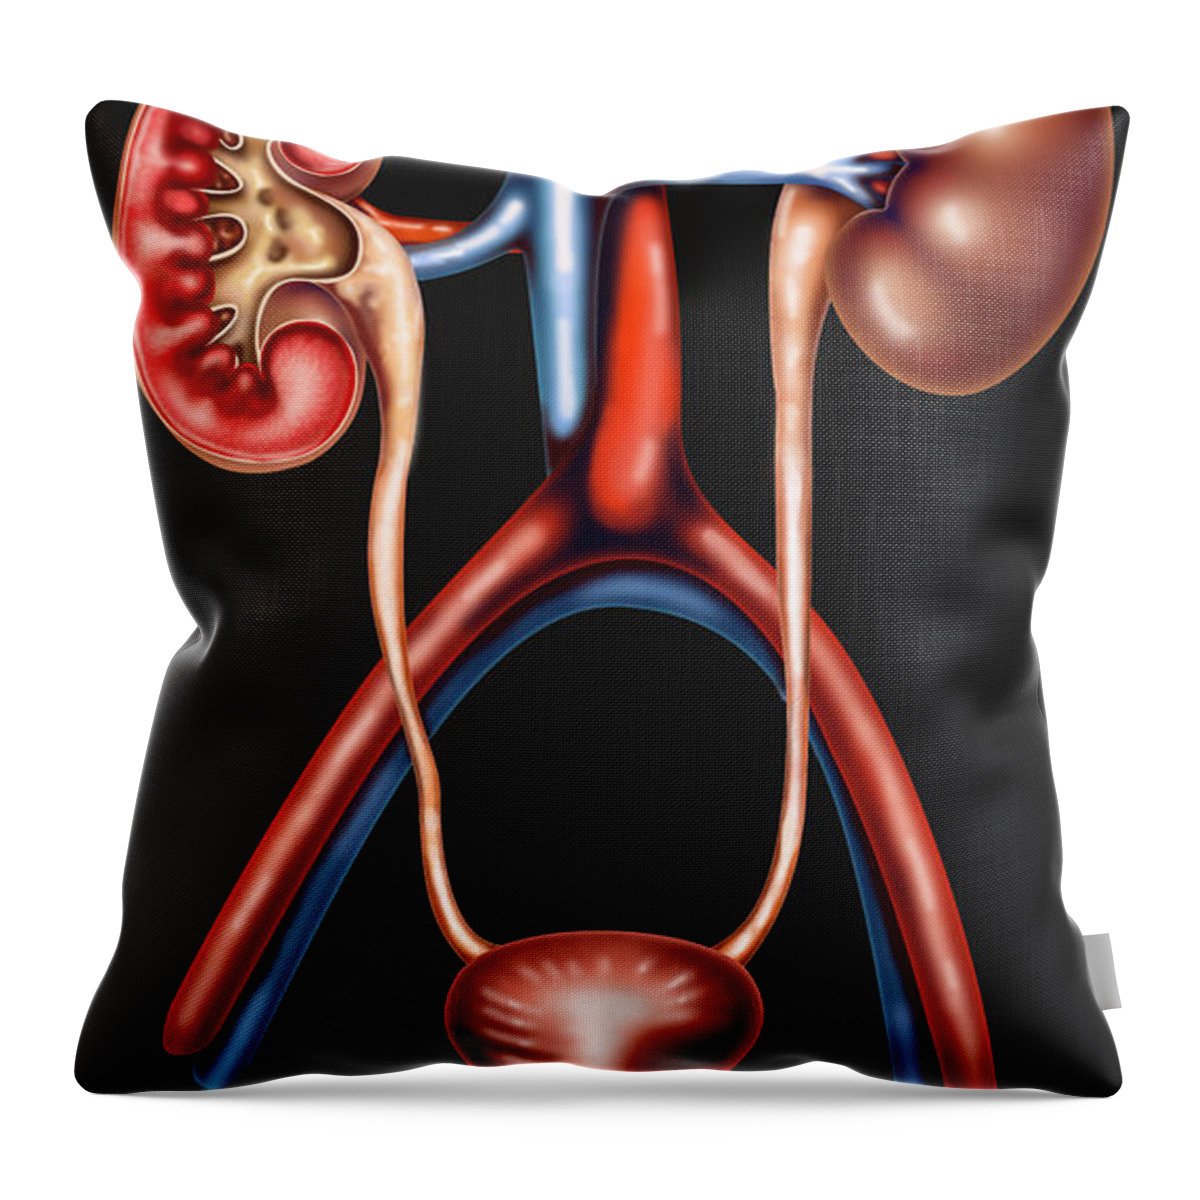 Illustration Throw Pillow featuring the photograph Nephritis by Gwen Shockey